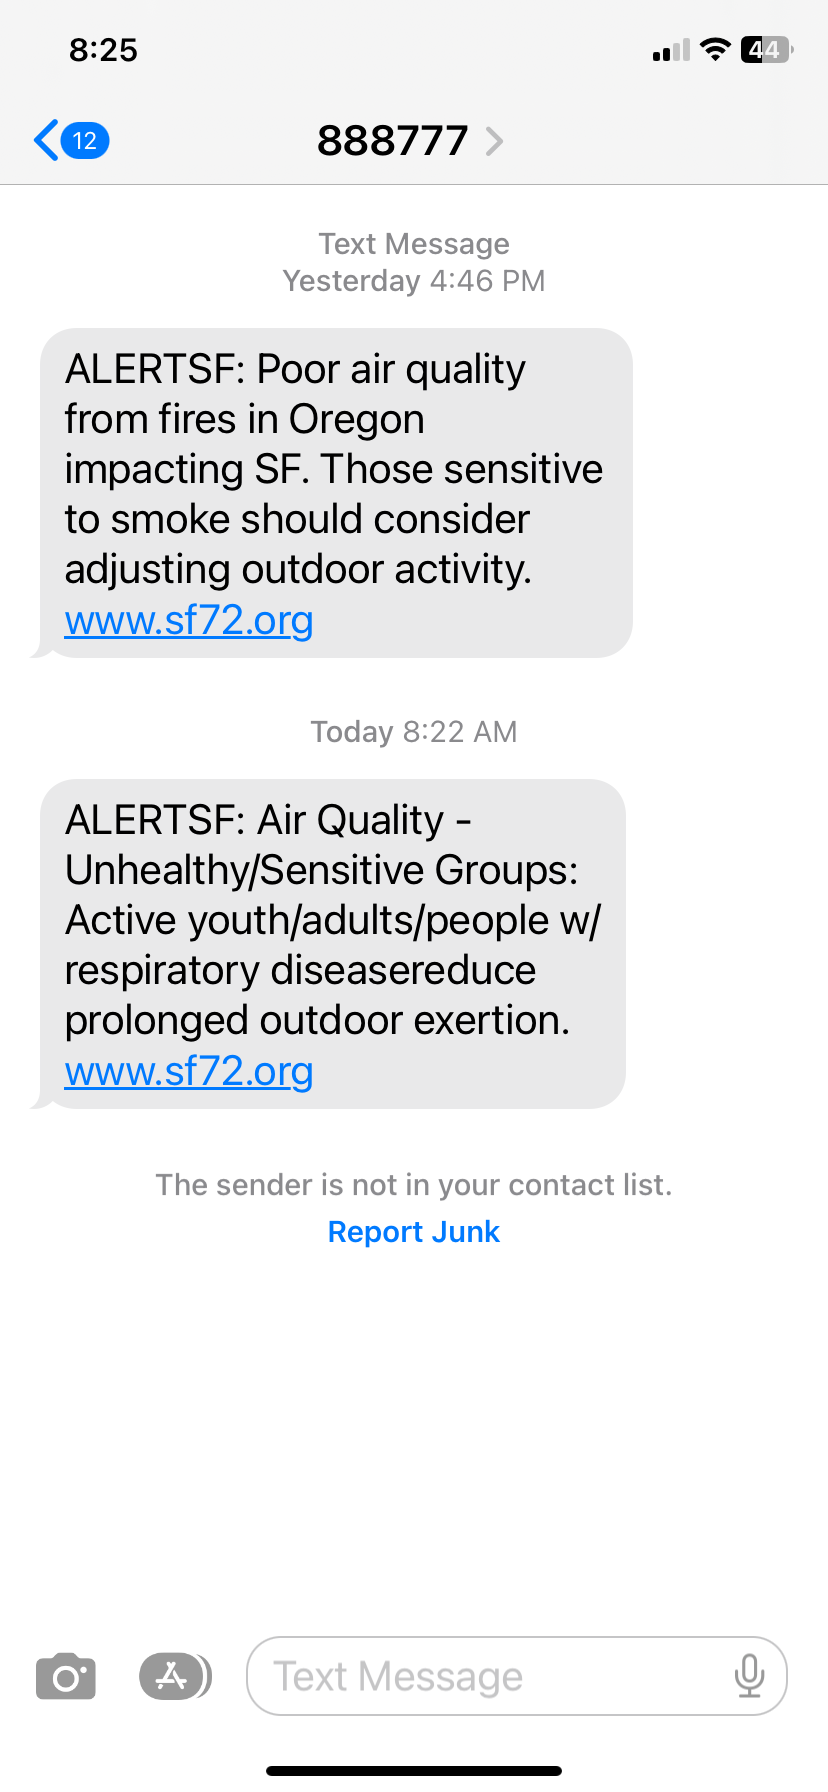 Air quality alert warnings sent to residents in San Francisco on Tuesday and Wednesday. Smoke from wildfires in northern California and southern Oregon created unhealthy air quality in the San Francisco Bay area as it was pushed south by wind patterns.